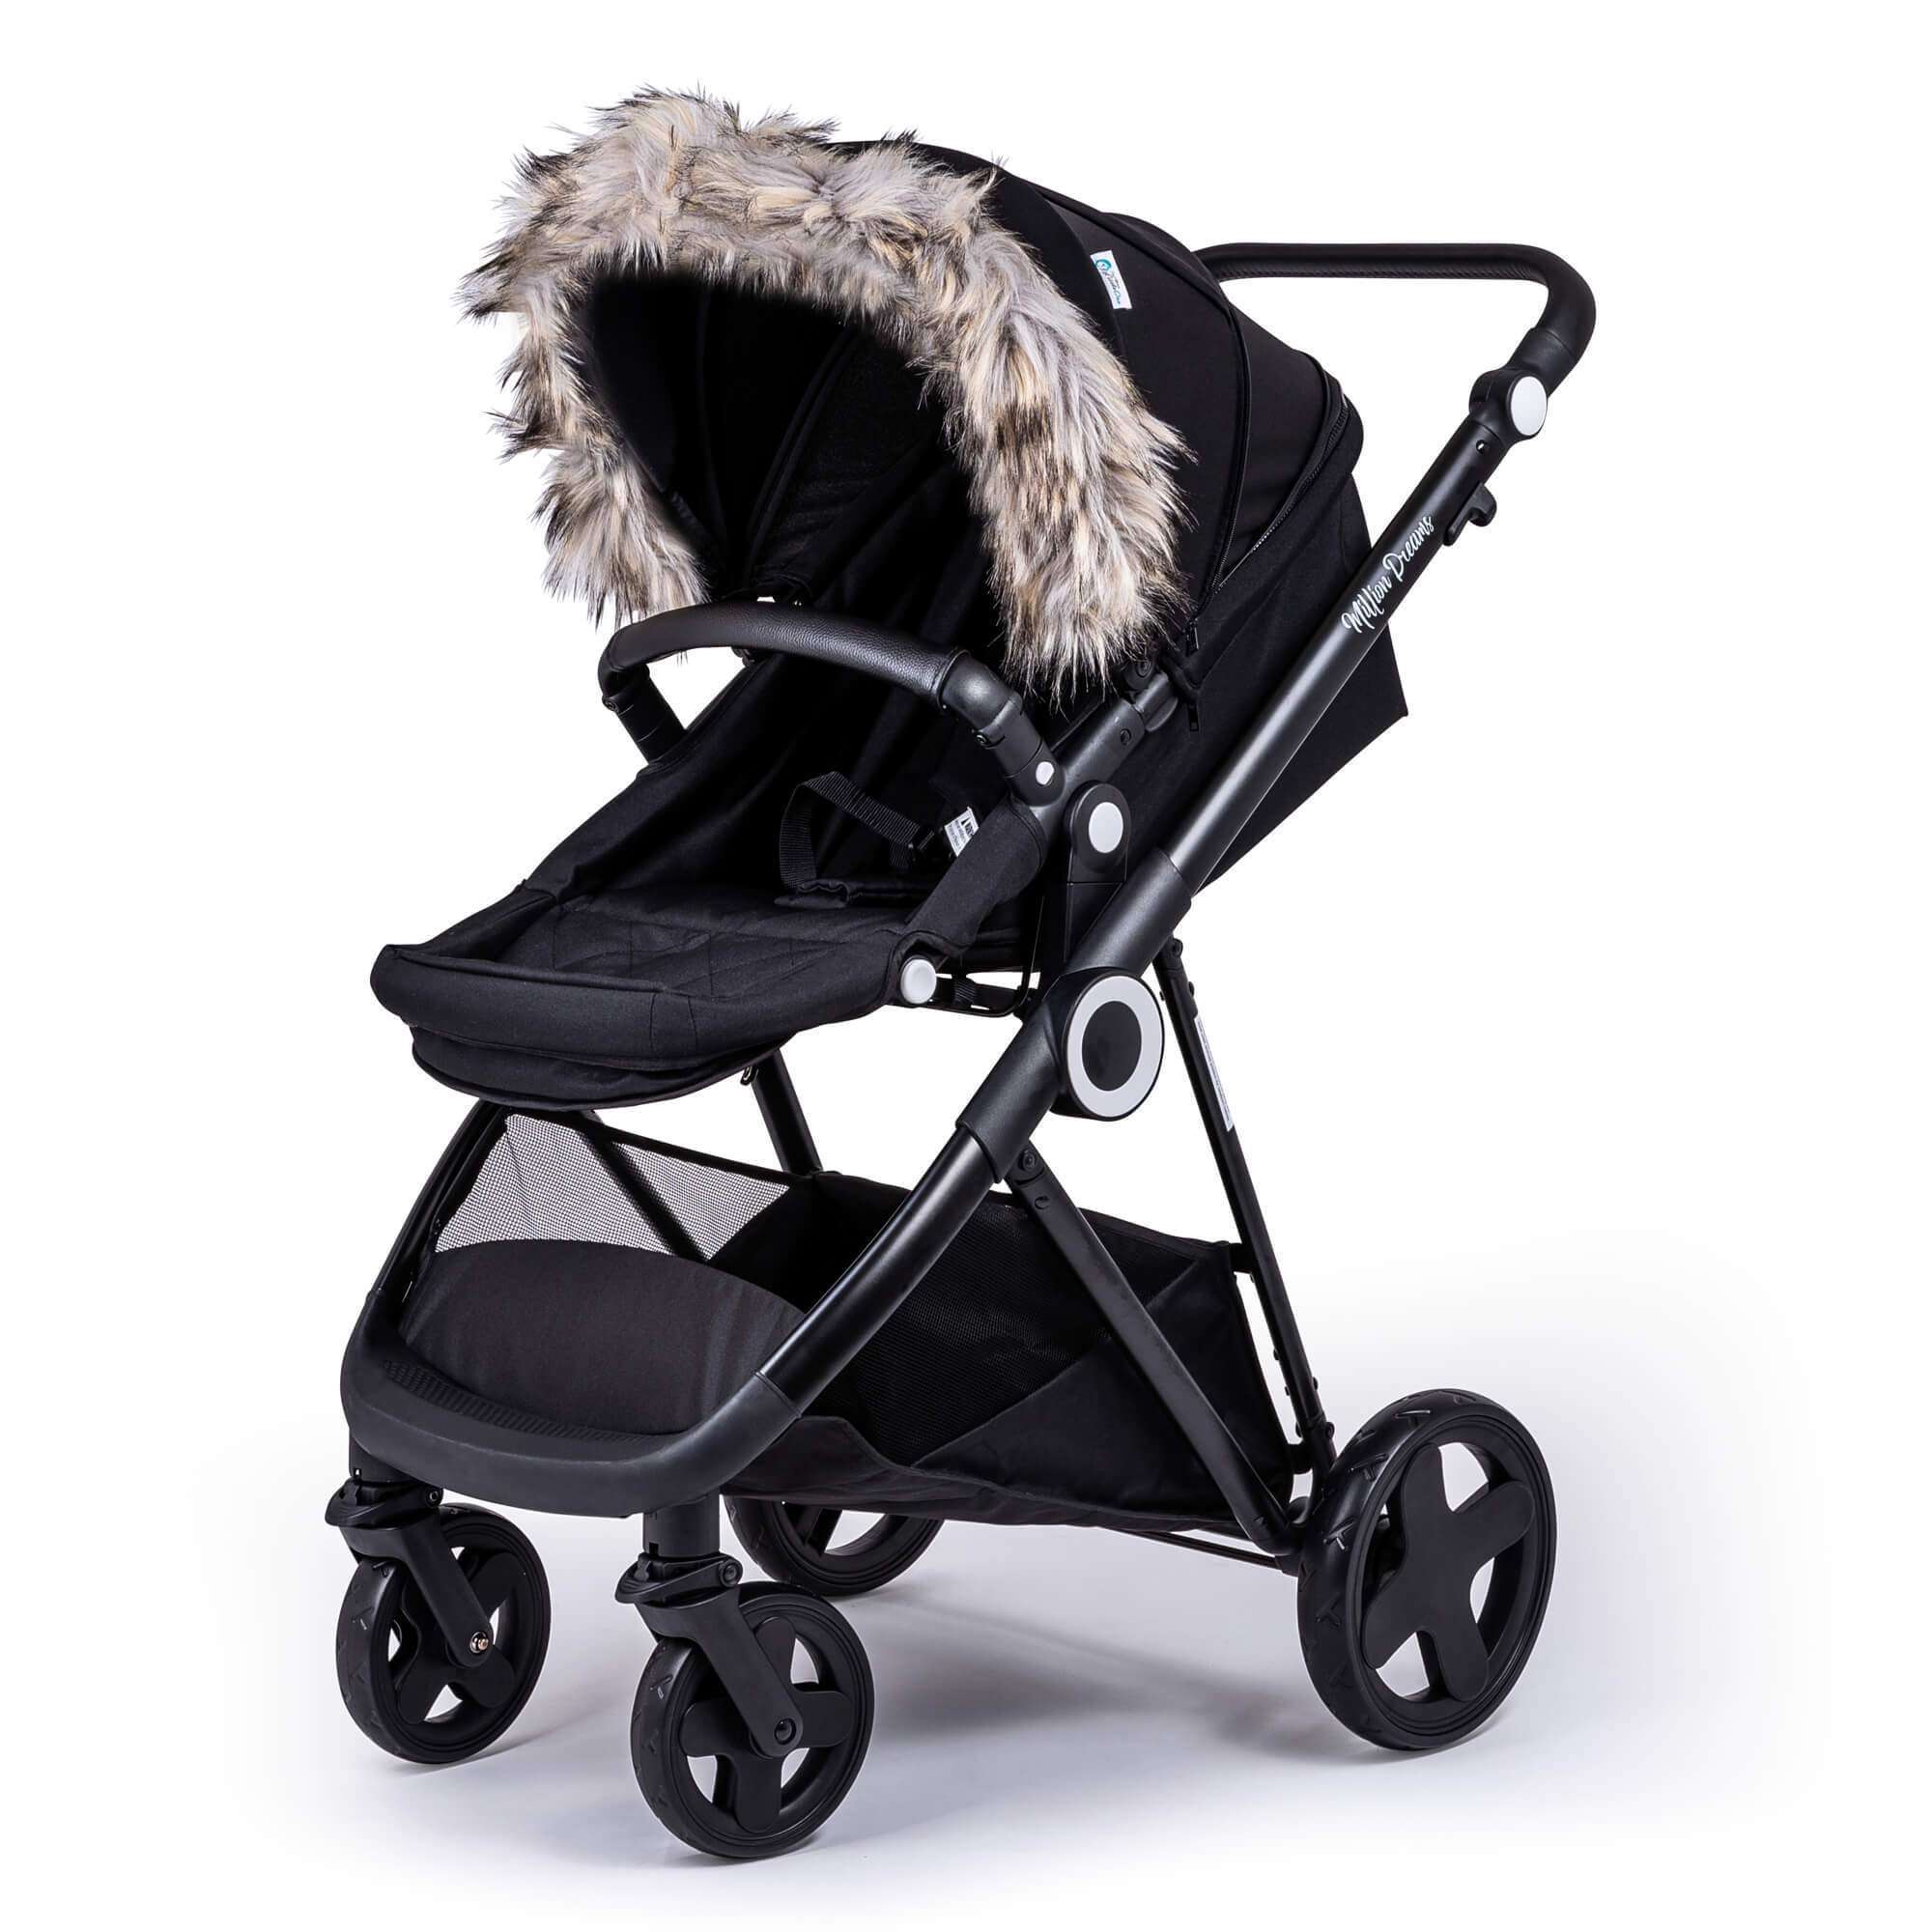 Pram Fur Hood Trim Attachment for Pushchair Compatible with Joolz - For Your Little One